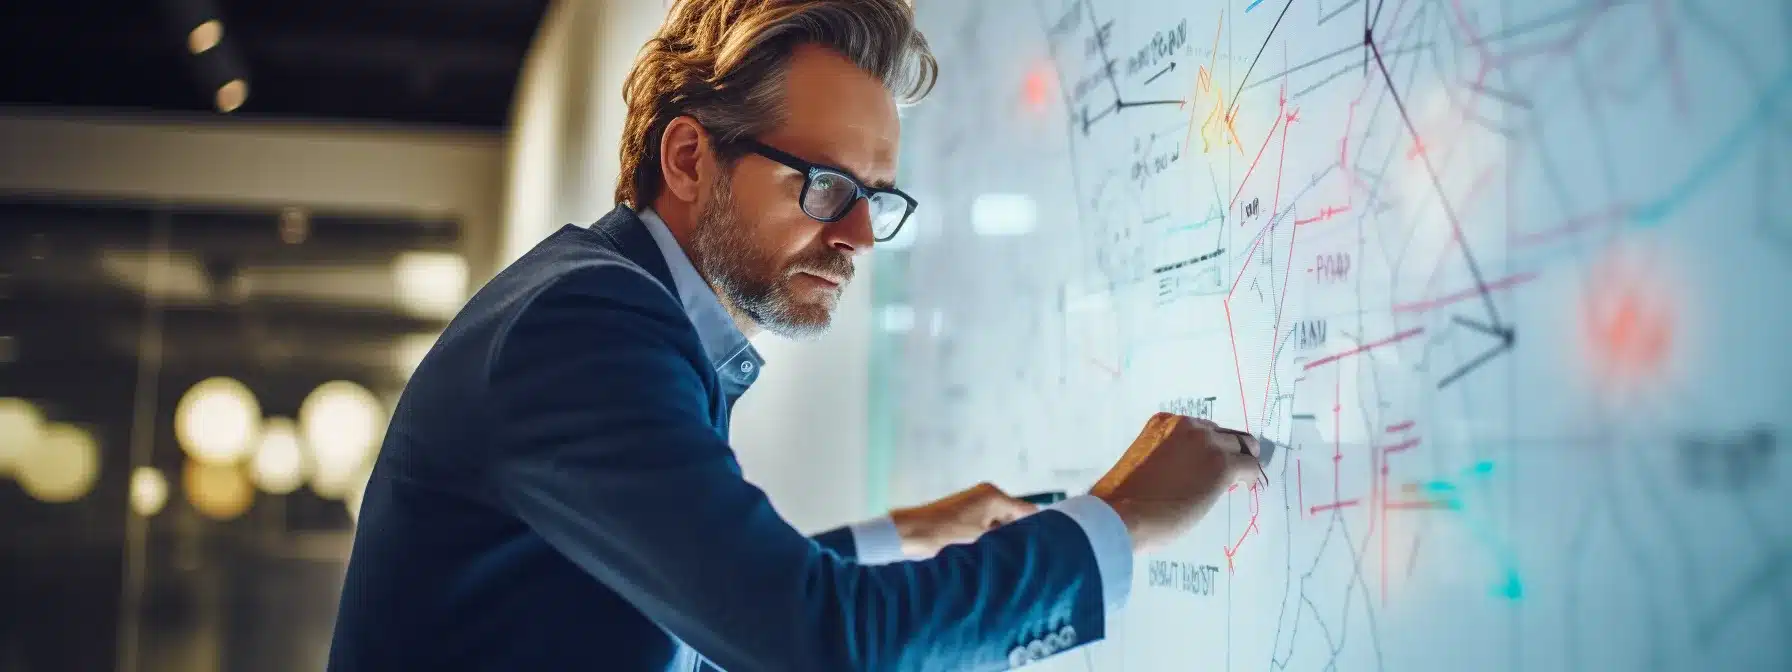 A Grand Strategist, Wearing Architect Glasses, Drawing Plans On A Large Whiteboard With Brand Strategy Keywords And Arrows Connecting Them.